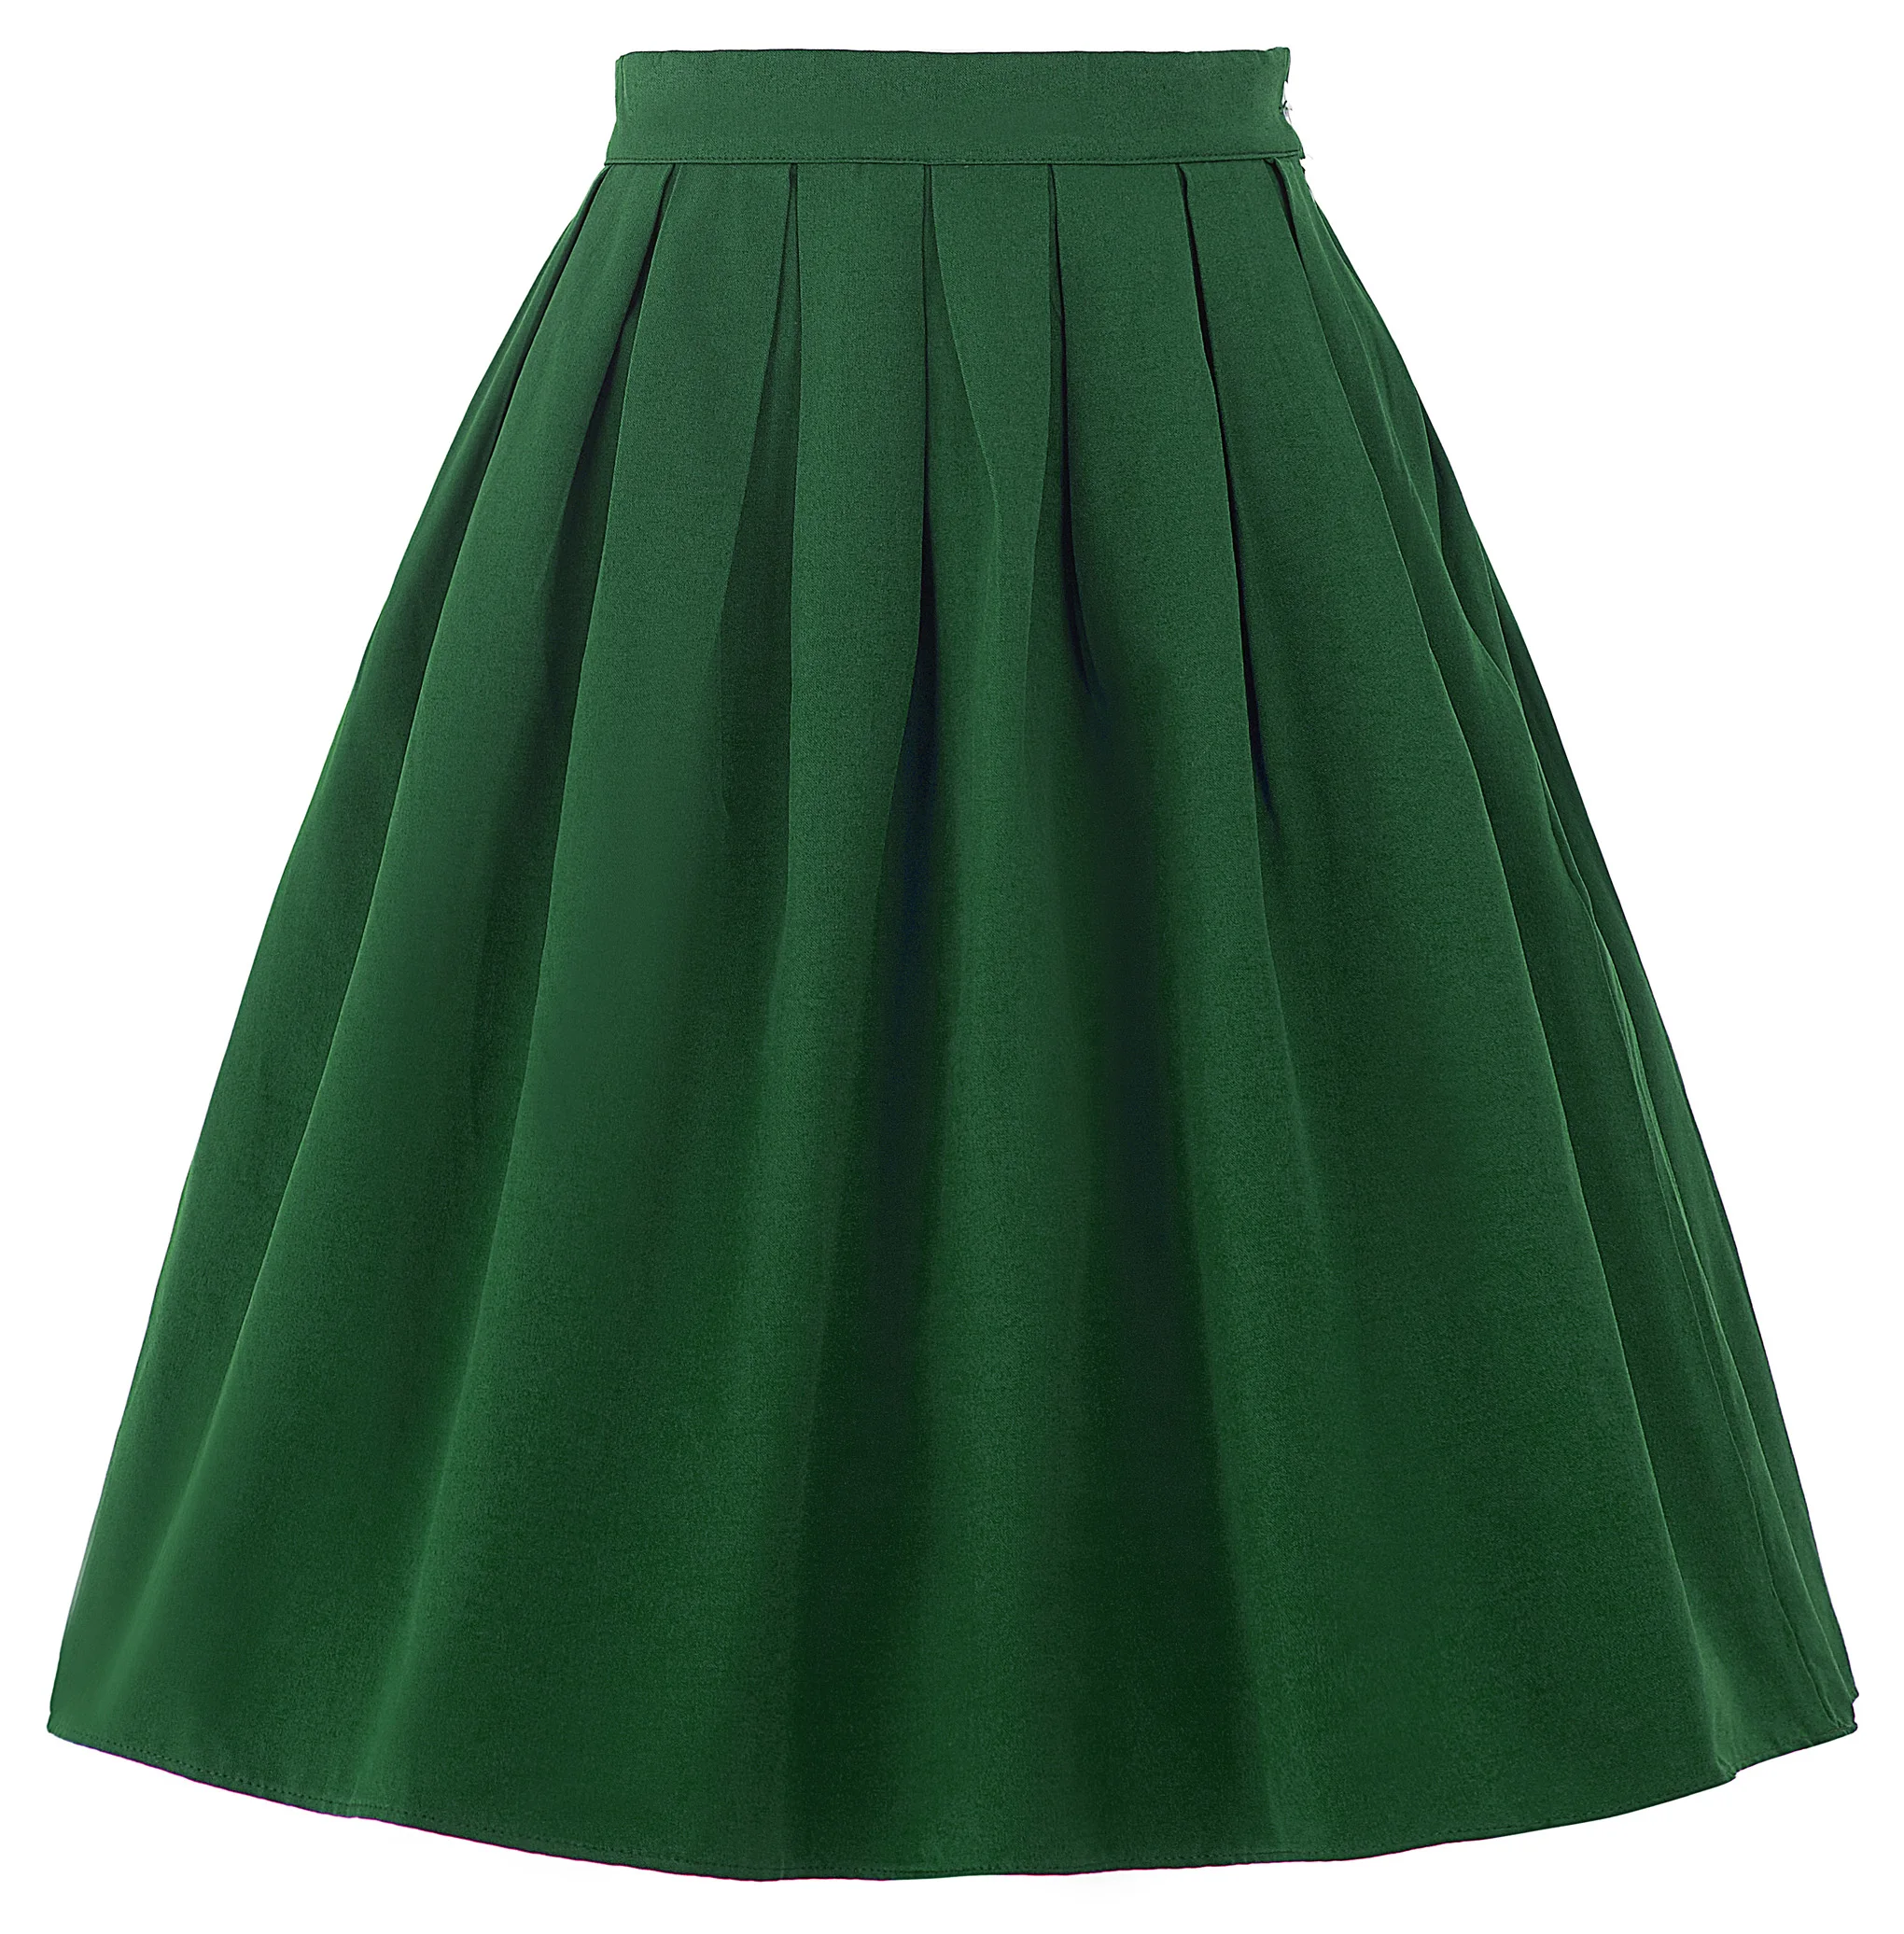 Womens Pleated Skirts Summer Flared Skater Vintage Skirt Solid Color